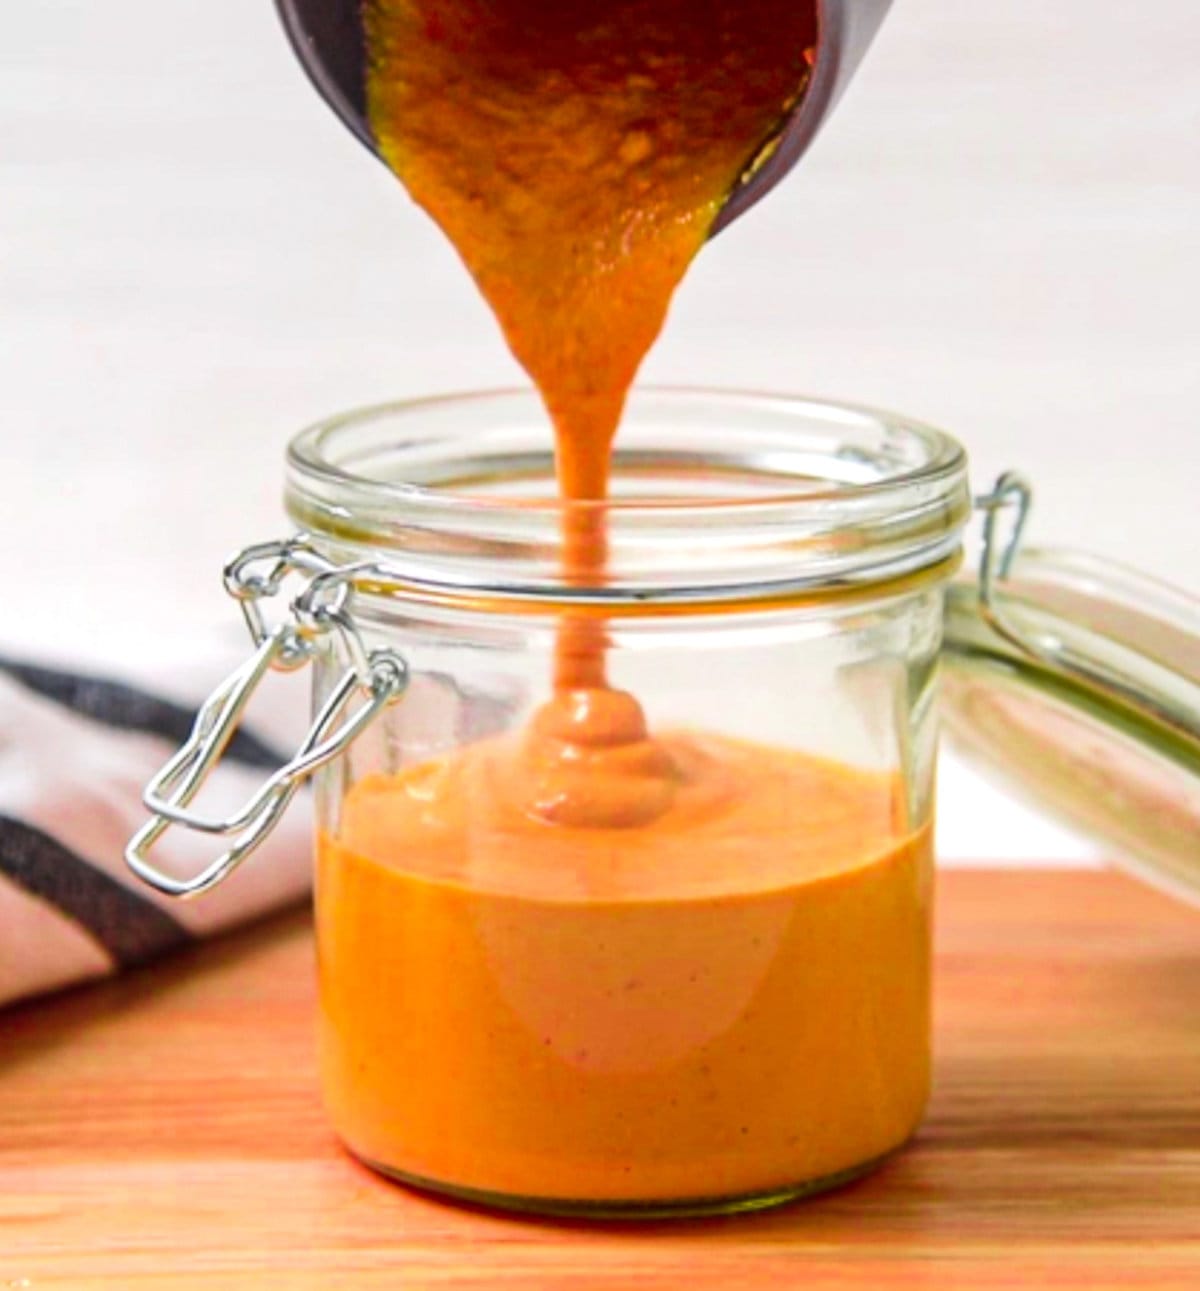 sauce being poured into a glass jar